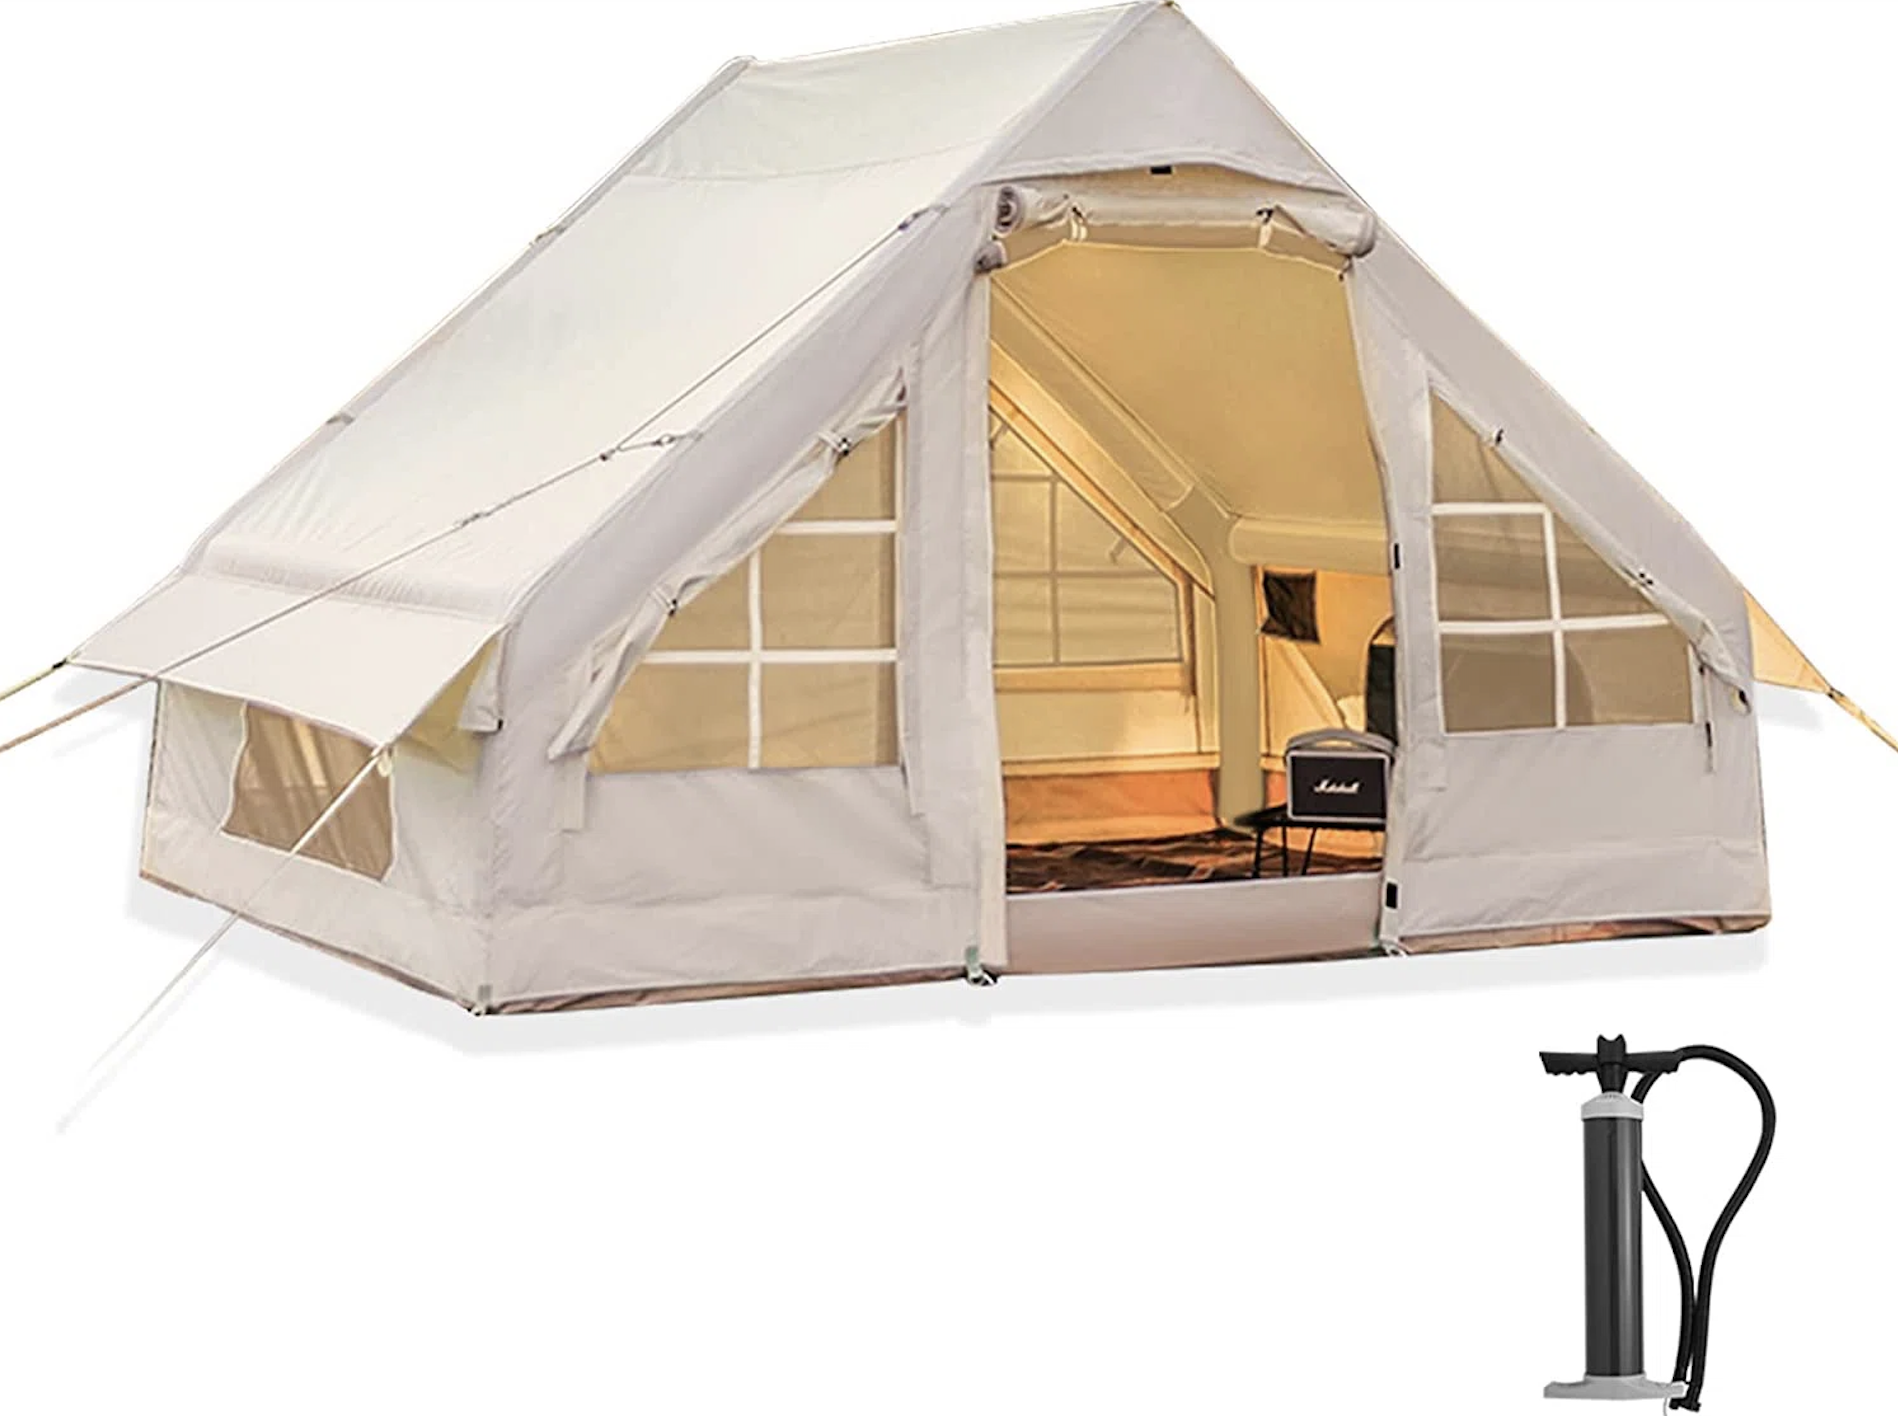 cg international 4 person glaming tent with ventilation windows, best large tent for families